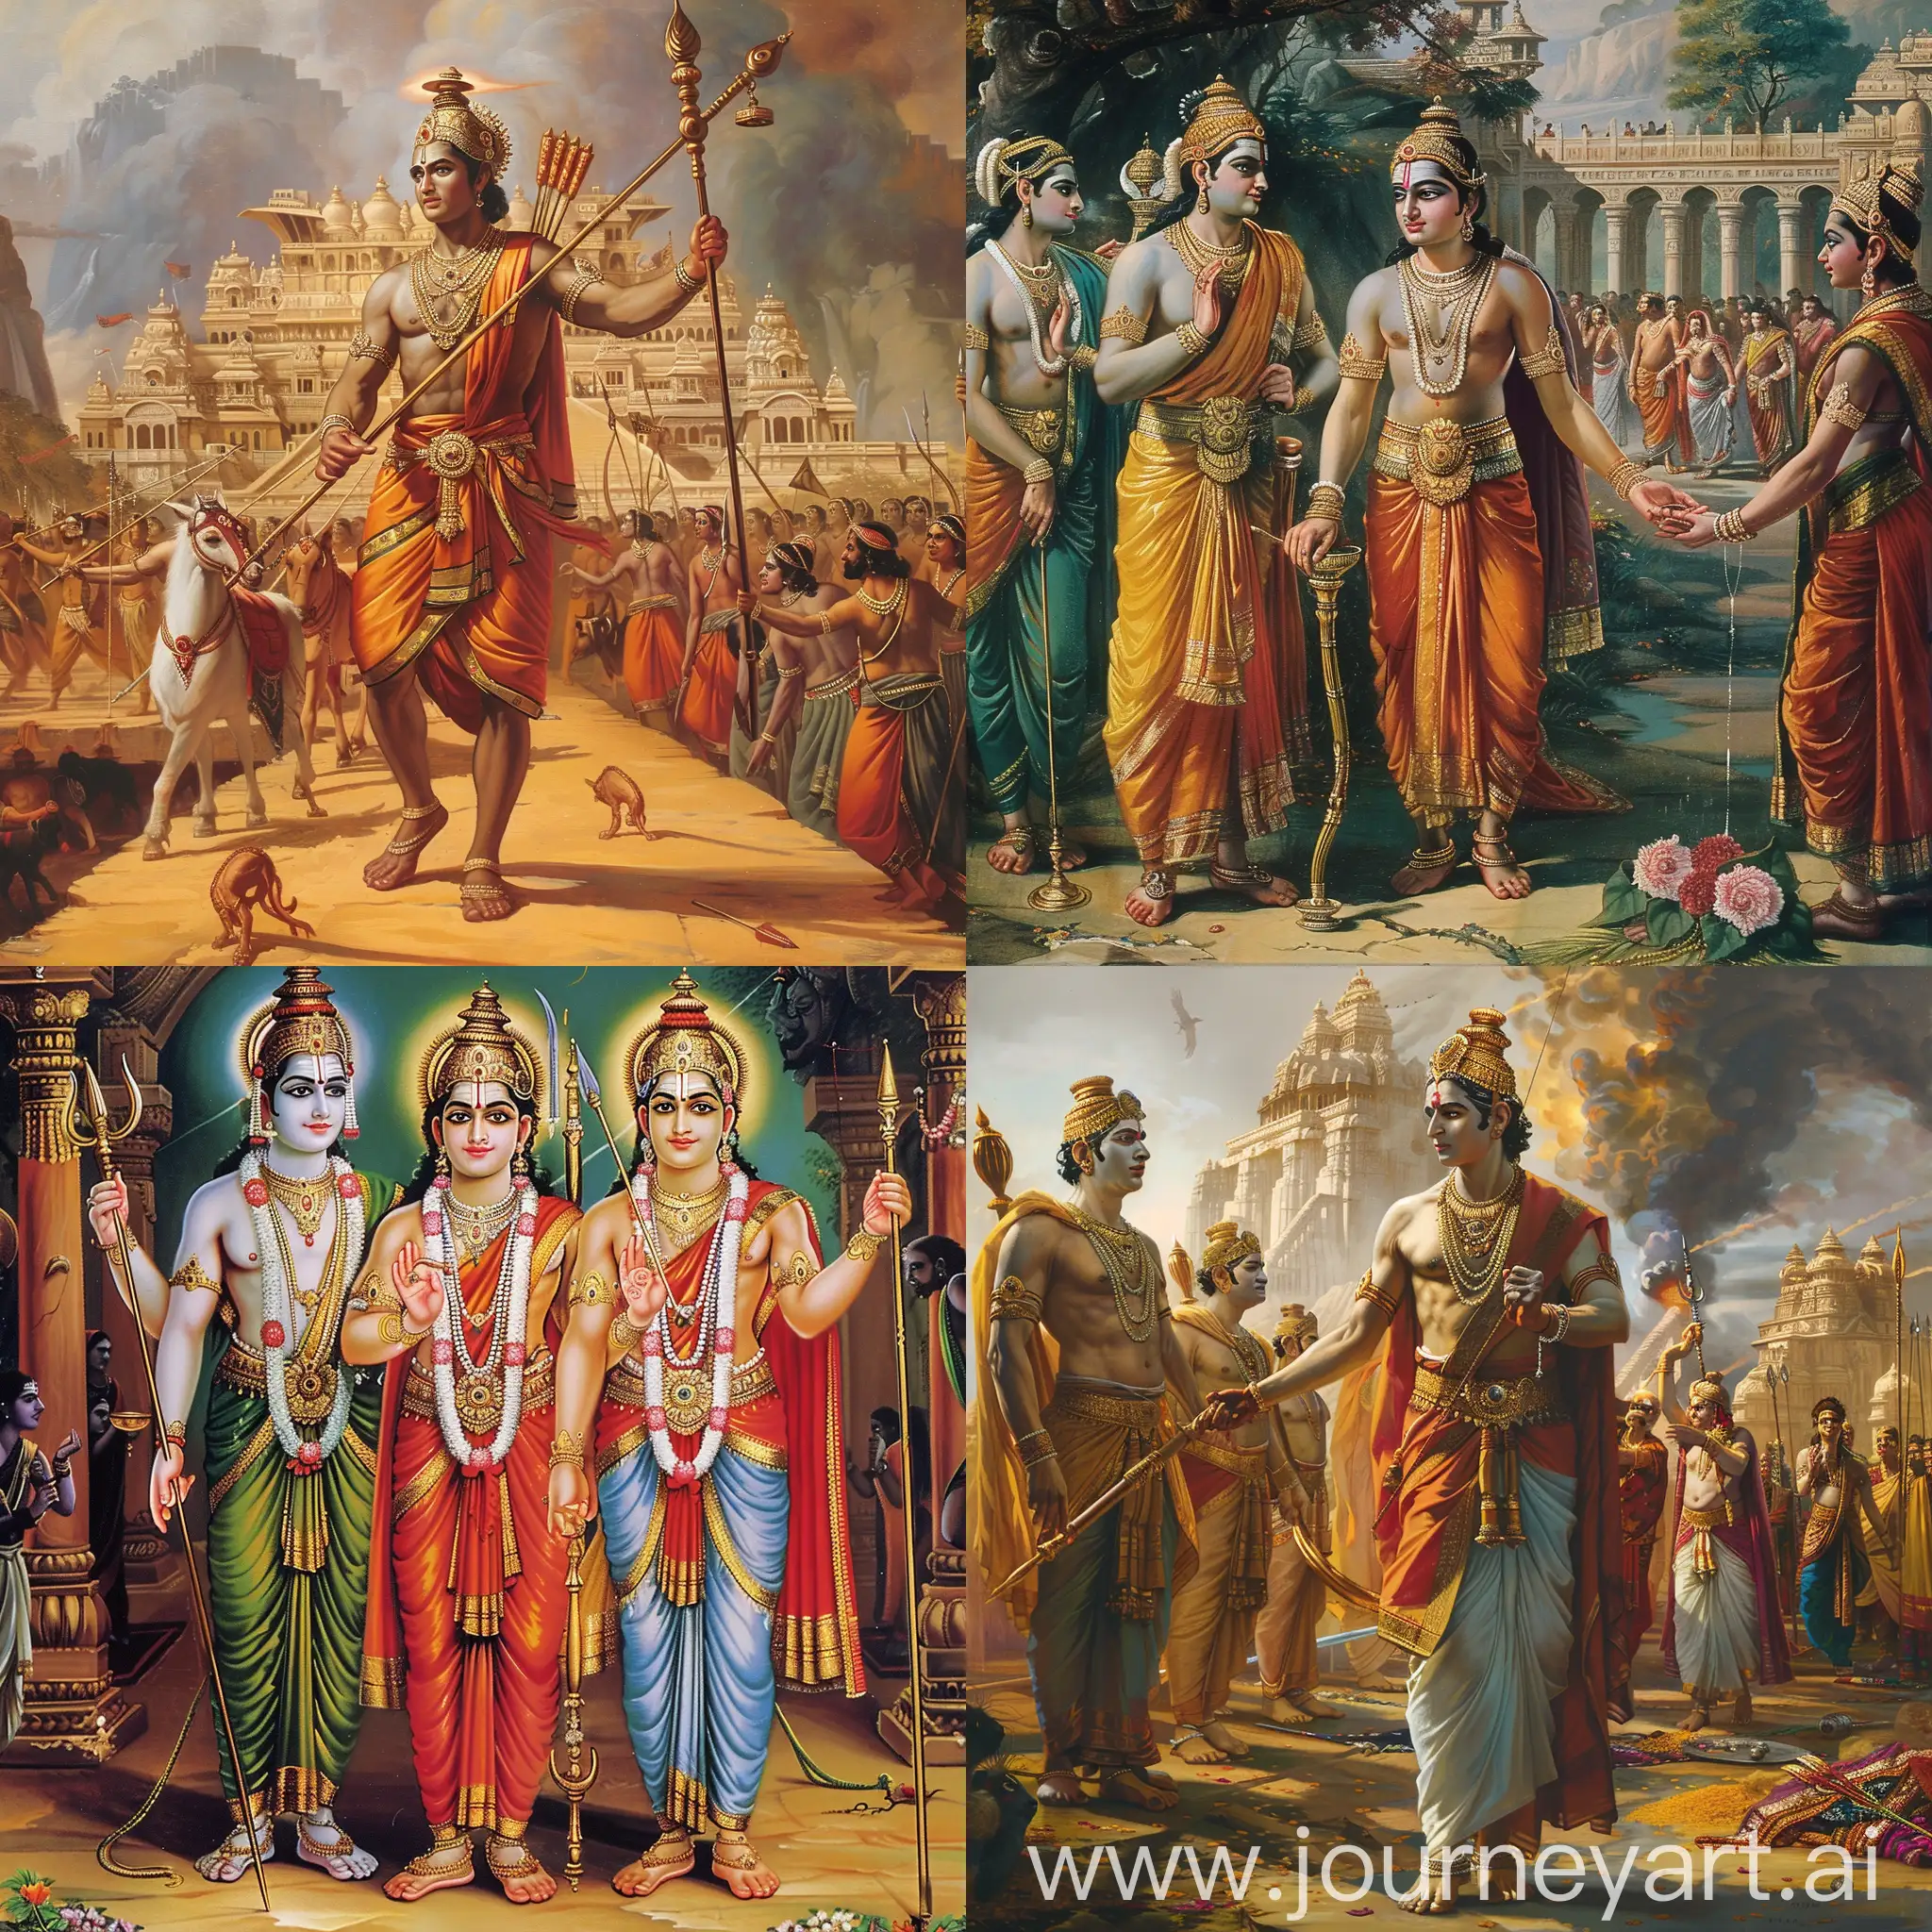 Five-Illustrations-Depicting-Key-Moments-of-the-Ramayana-Epic